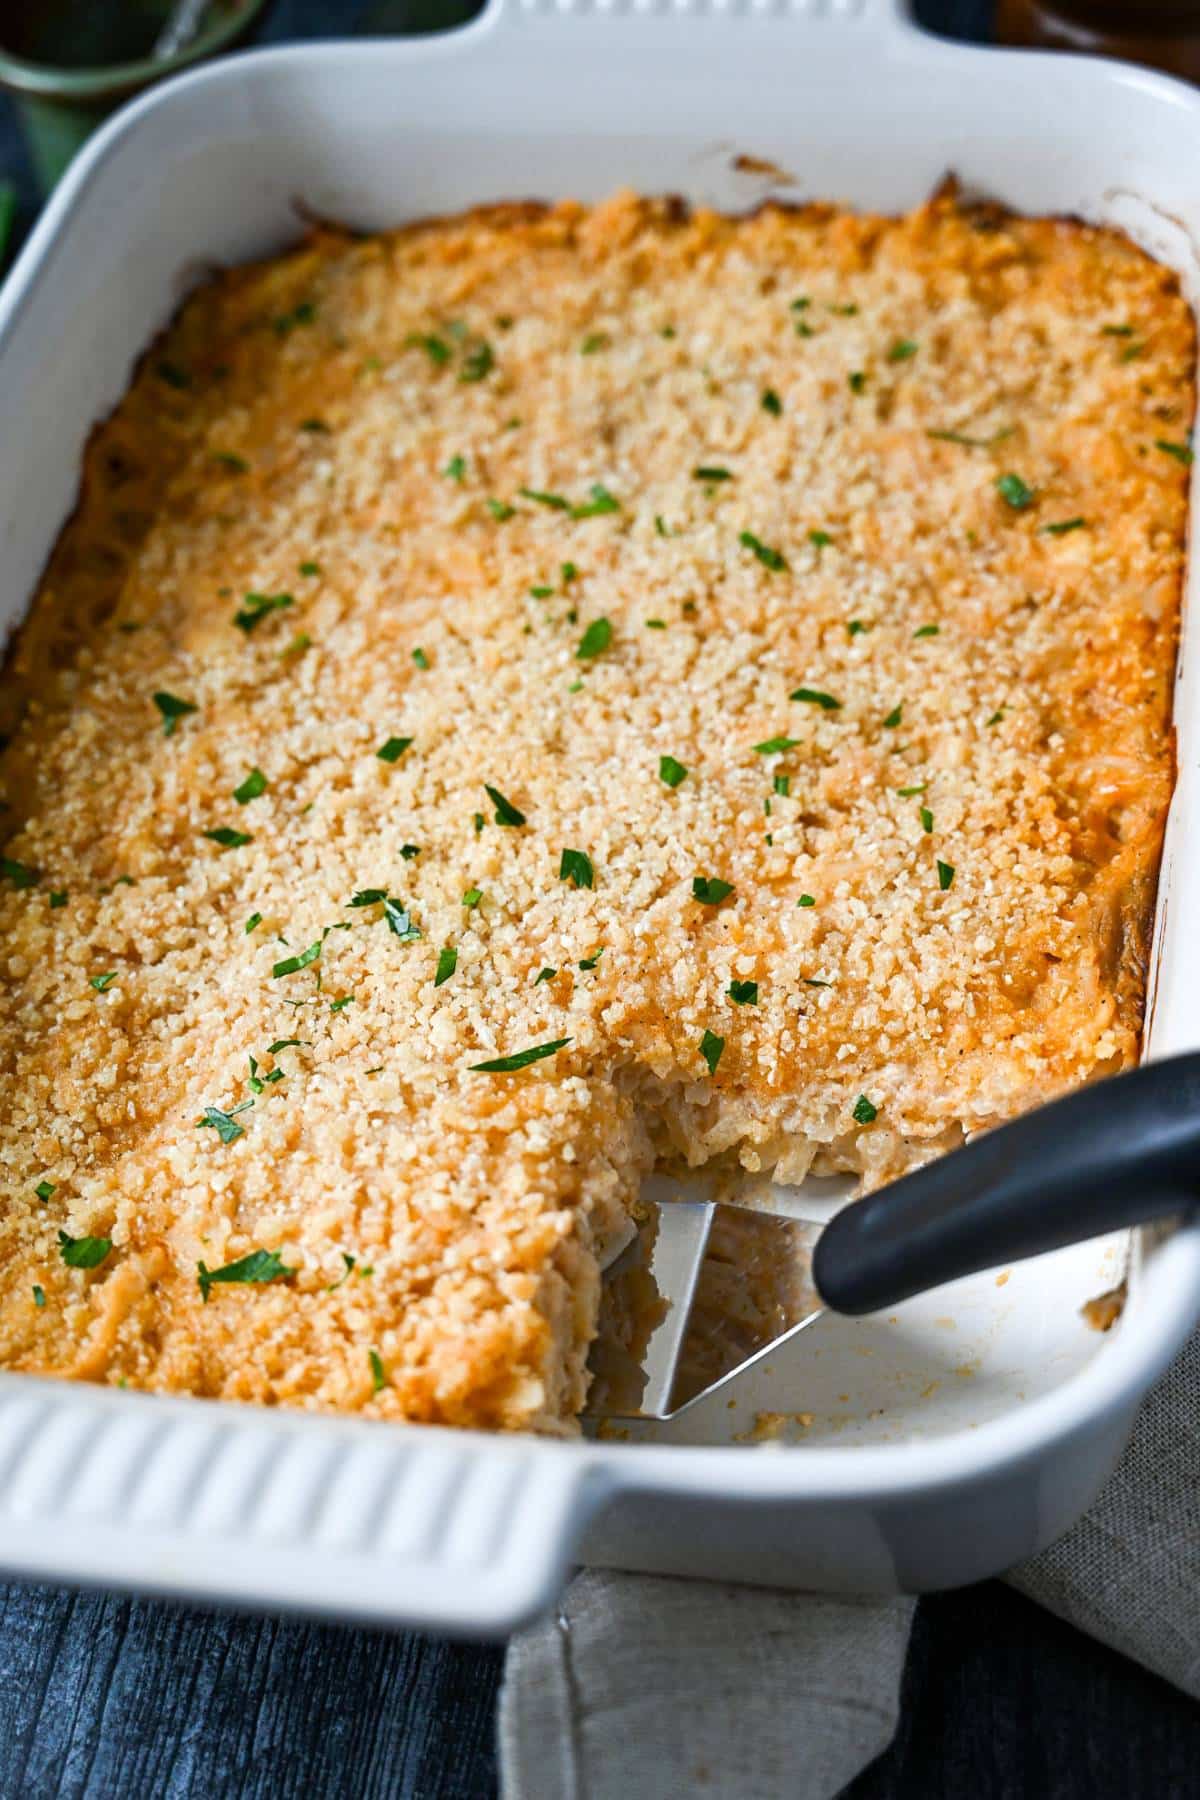 hashbrown casserole hot from the oven with a serving cut out of it